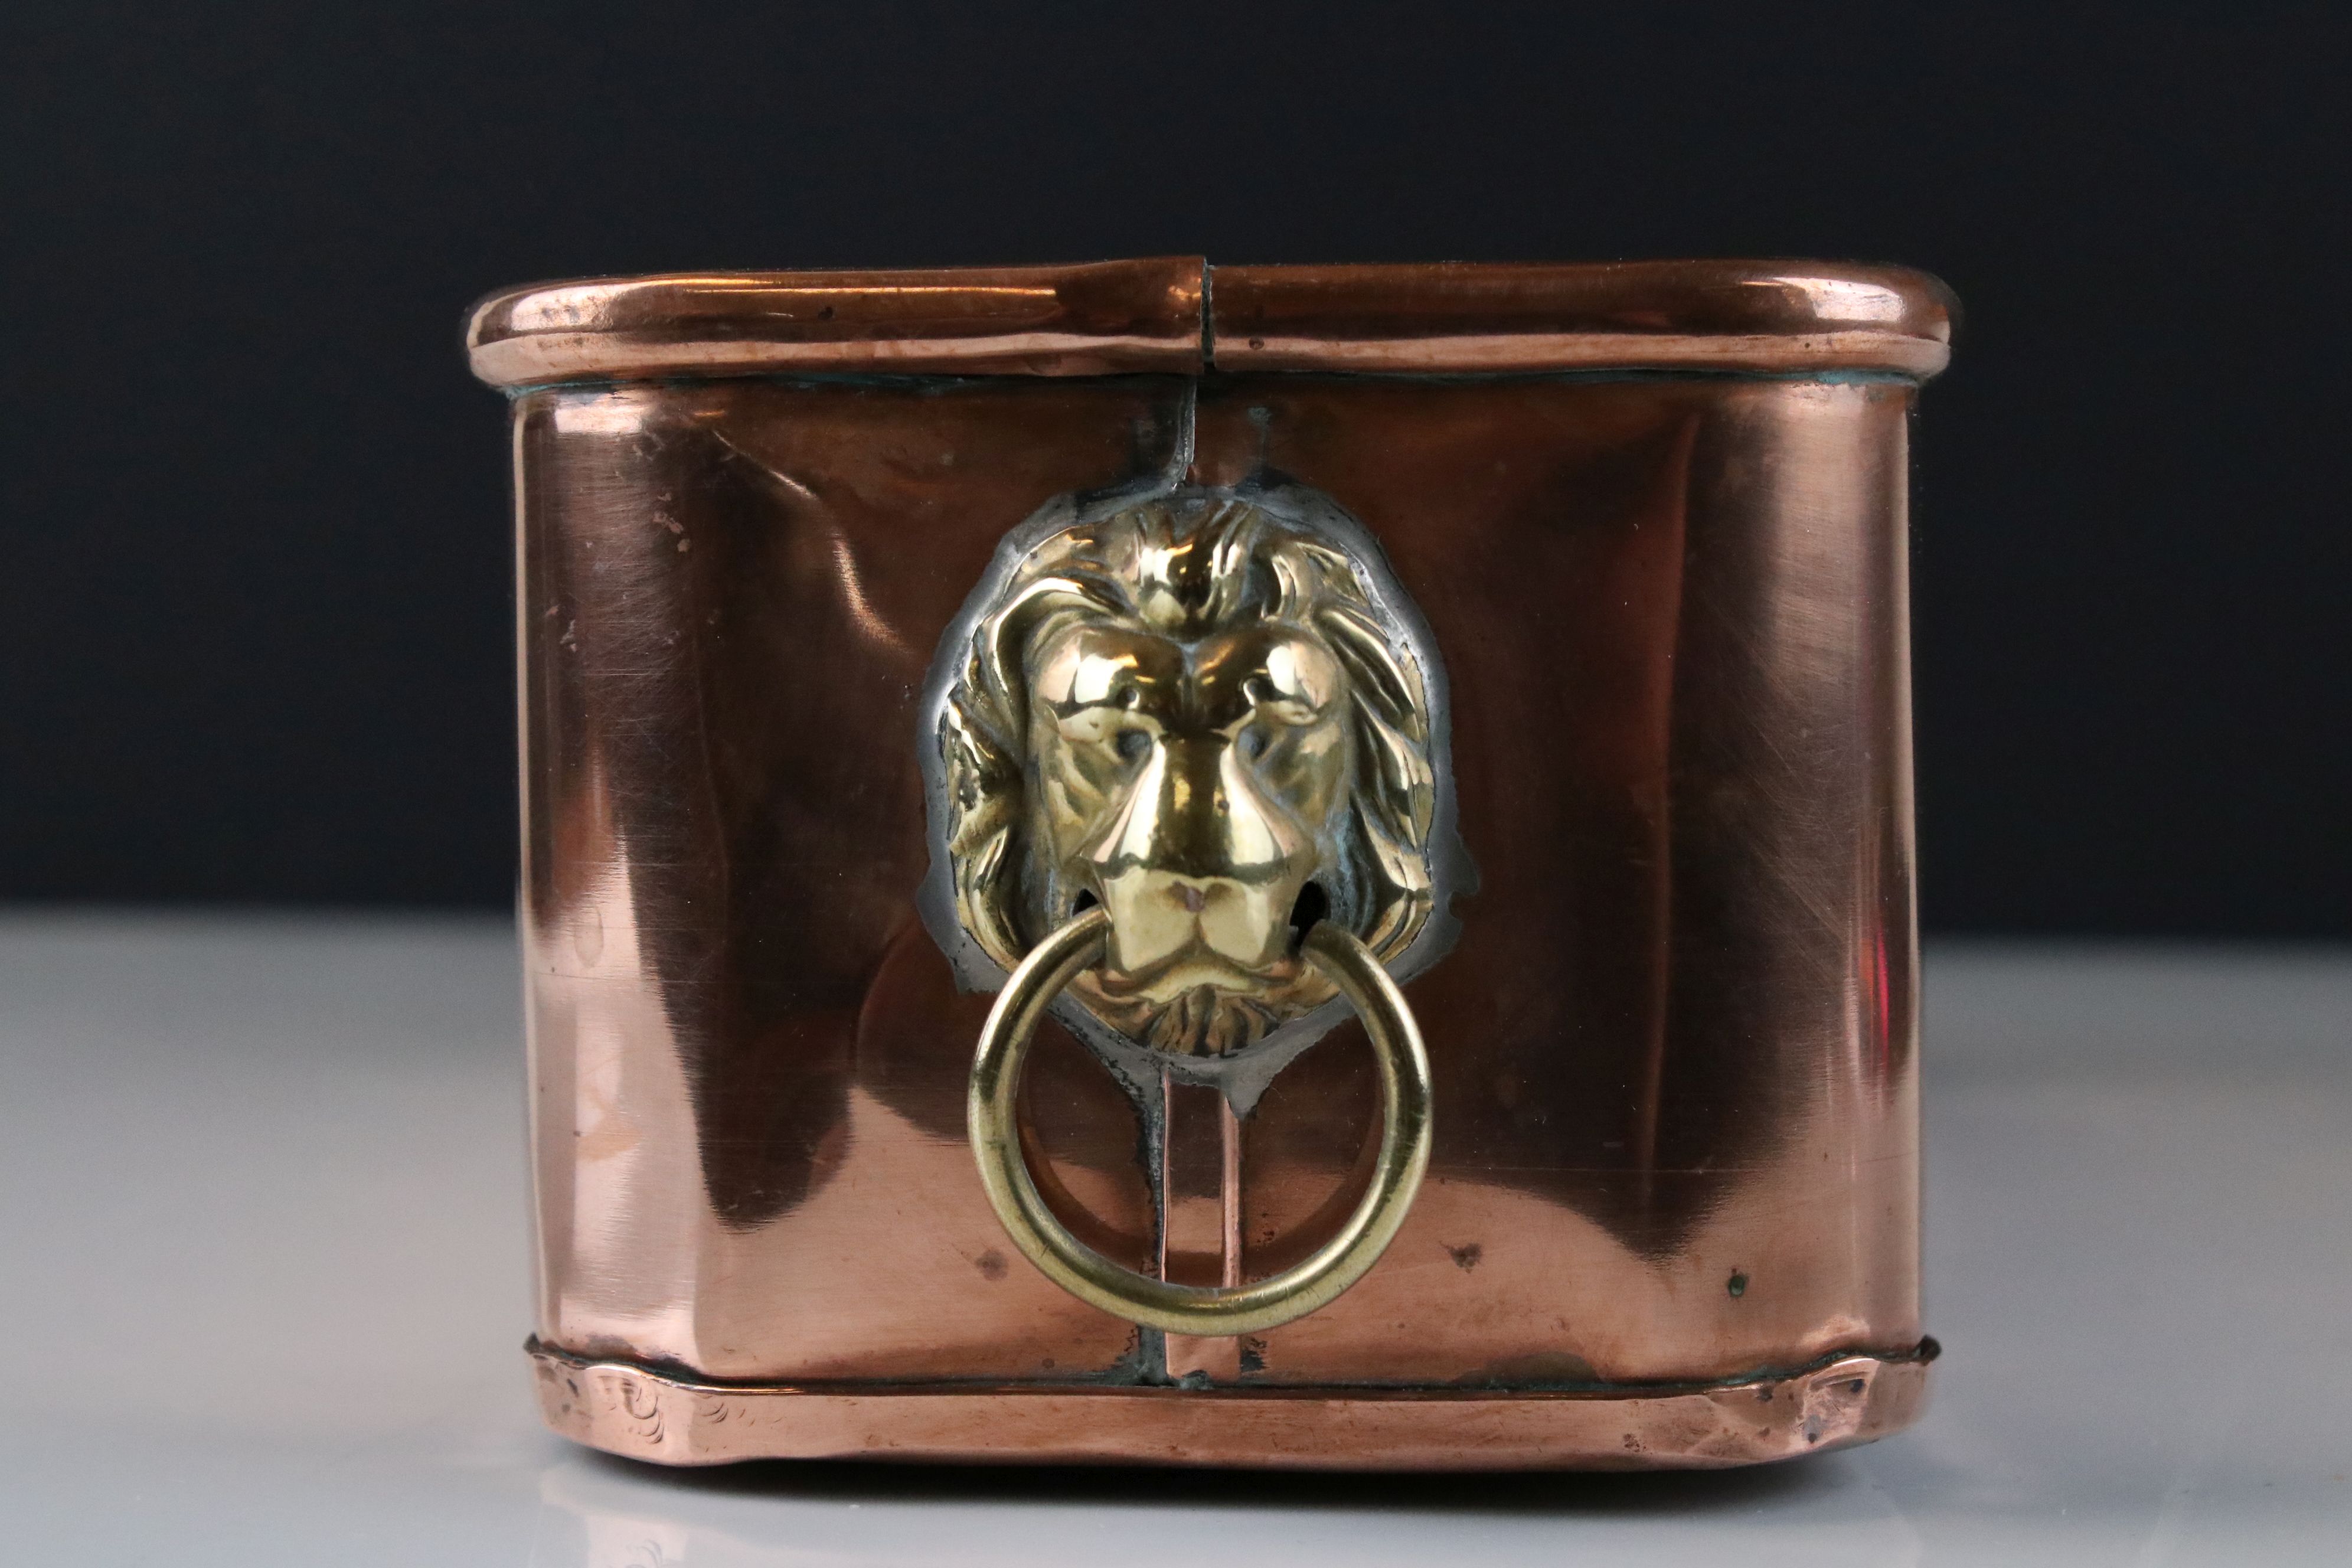 Copper Rectangular Planter with Brass Lion Mask Ring Handles, 31cms long - Image 2 of 4